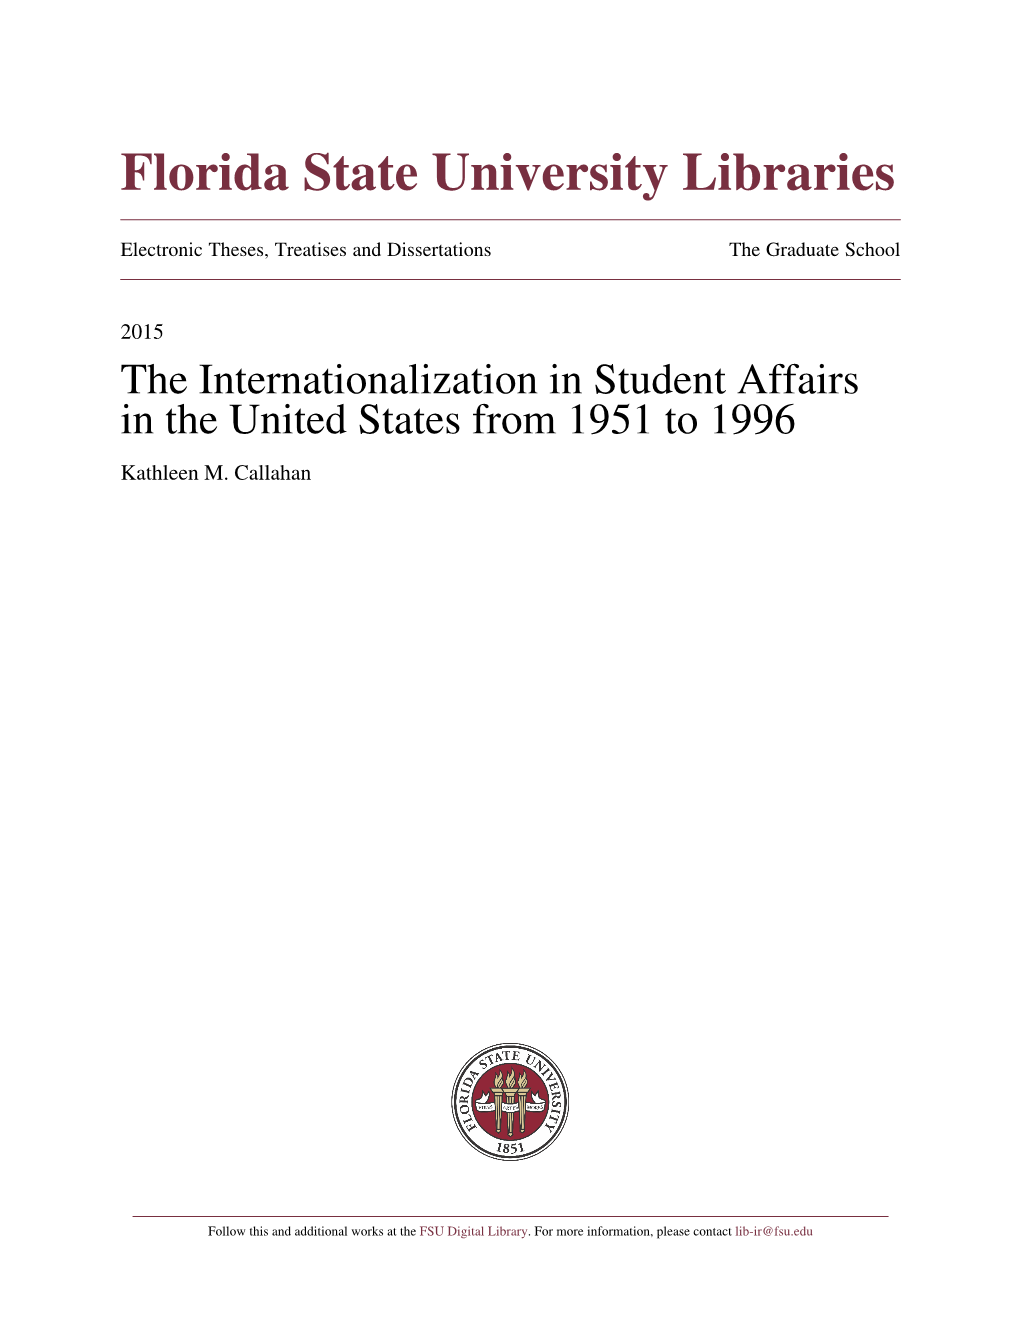 The Internationalization in Student Affairs in the United States from 1951 to 1996 Kathleen M